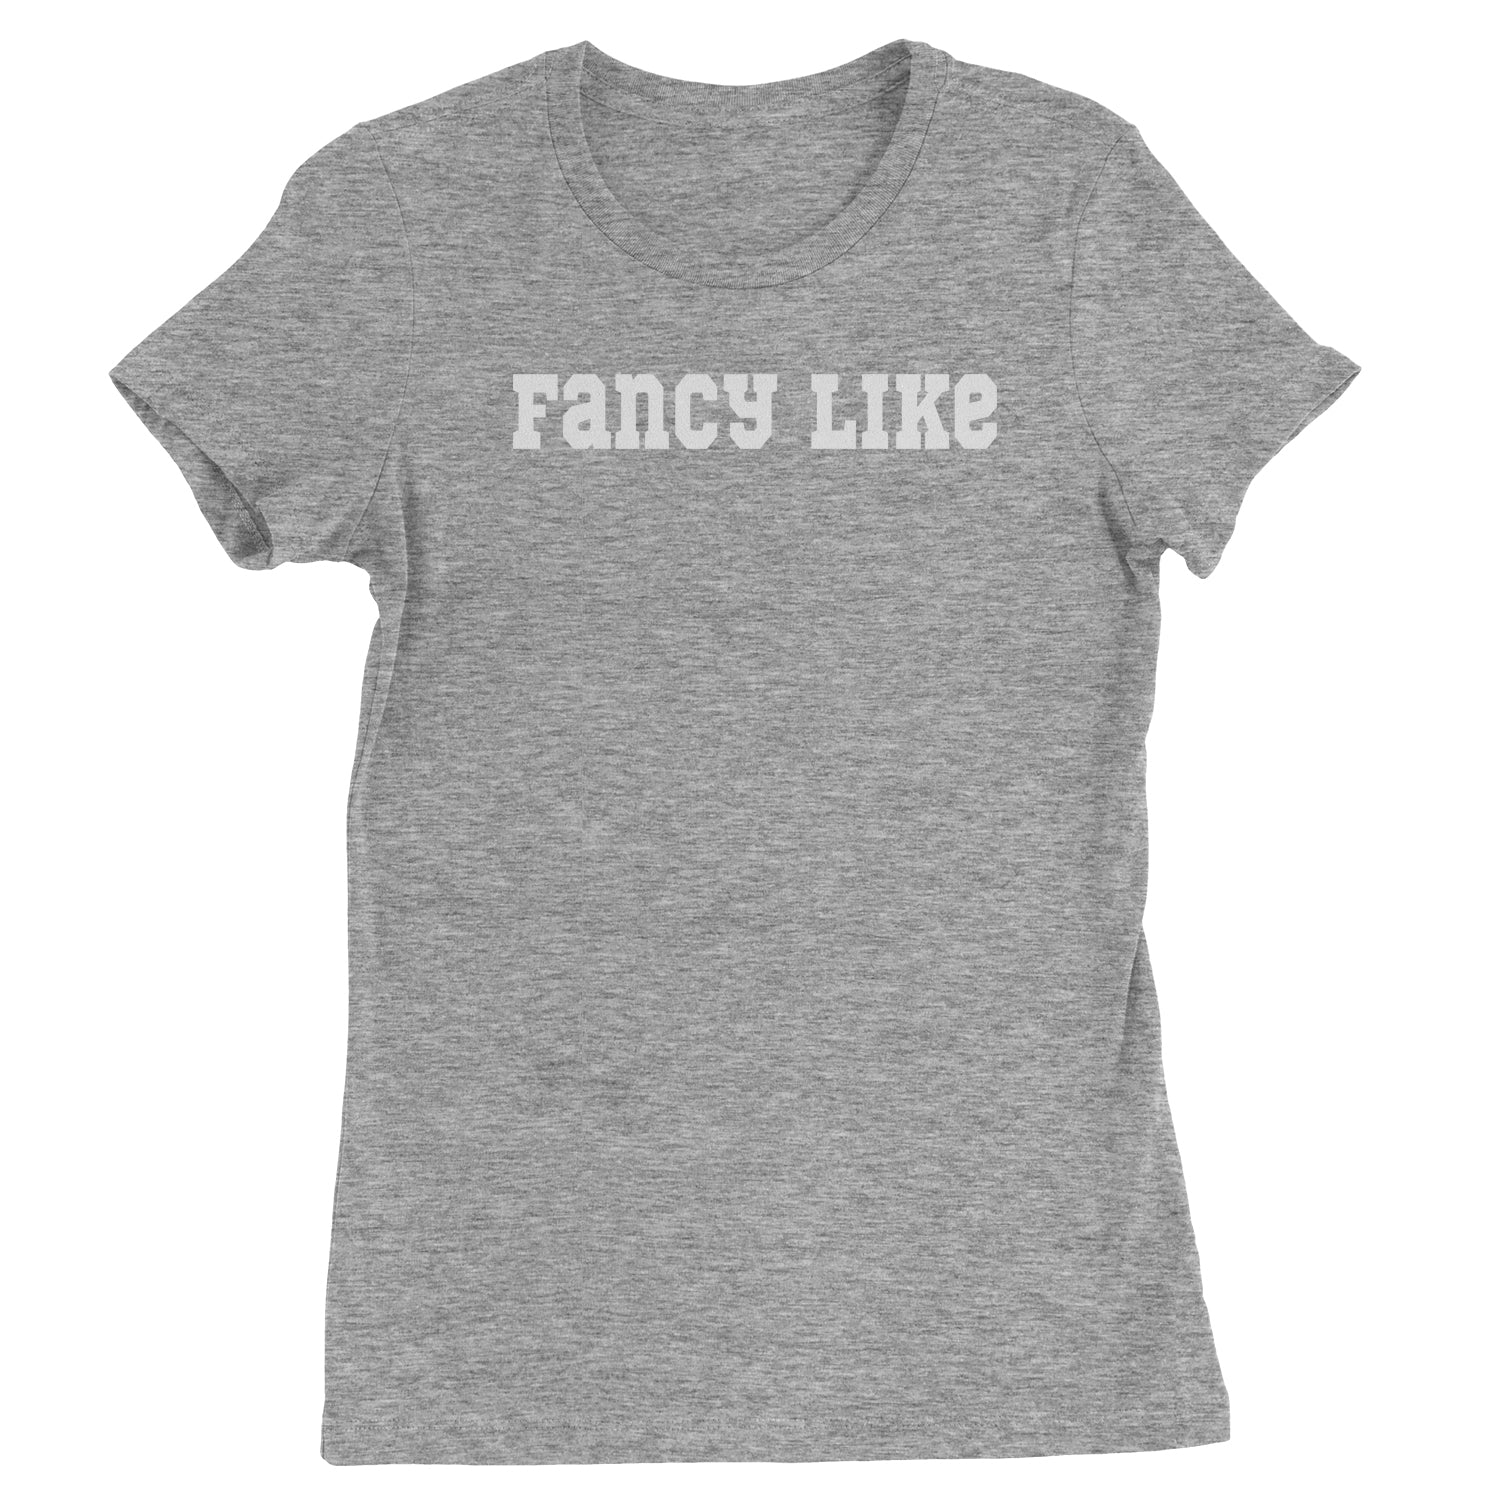 Fancy Like Womens T-shirt hayes, walter by Expression Tees